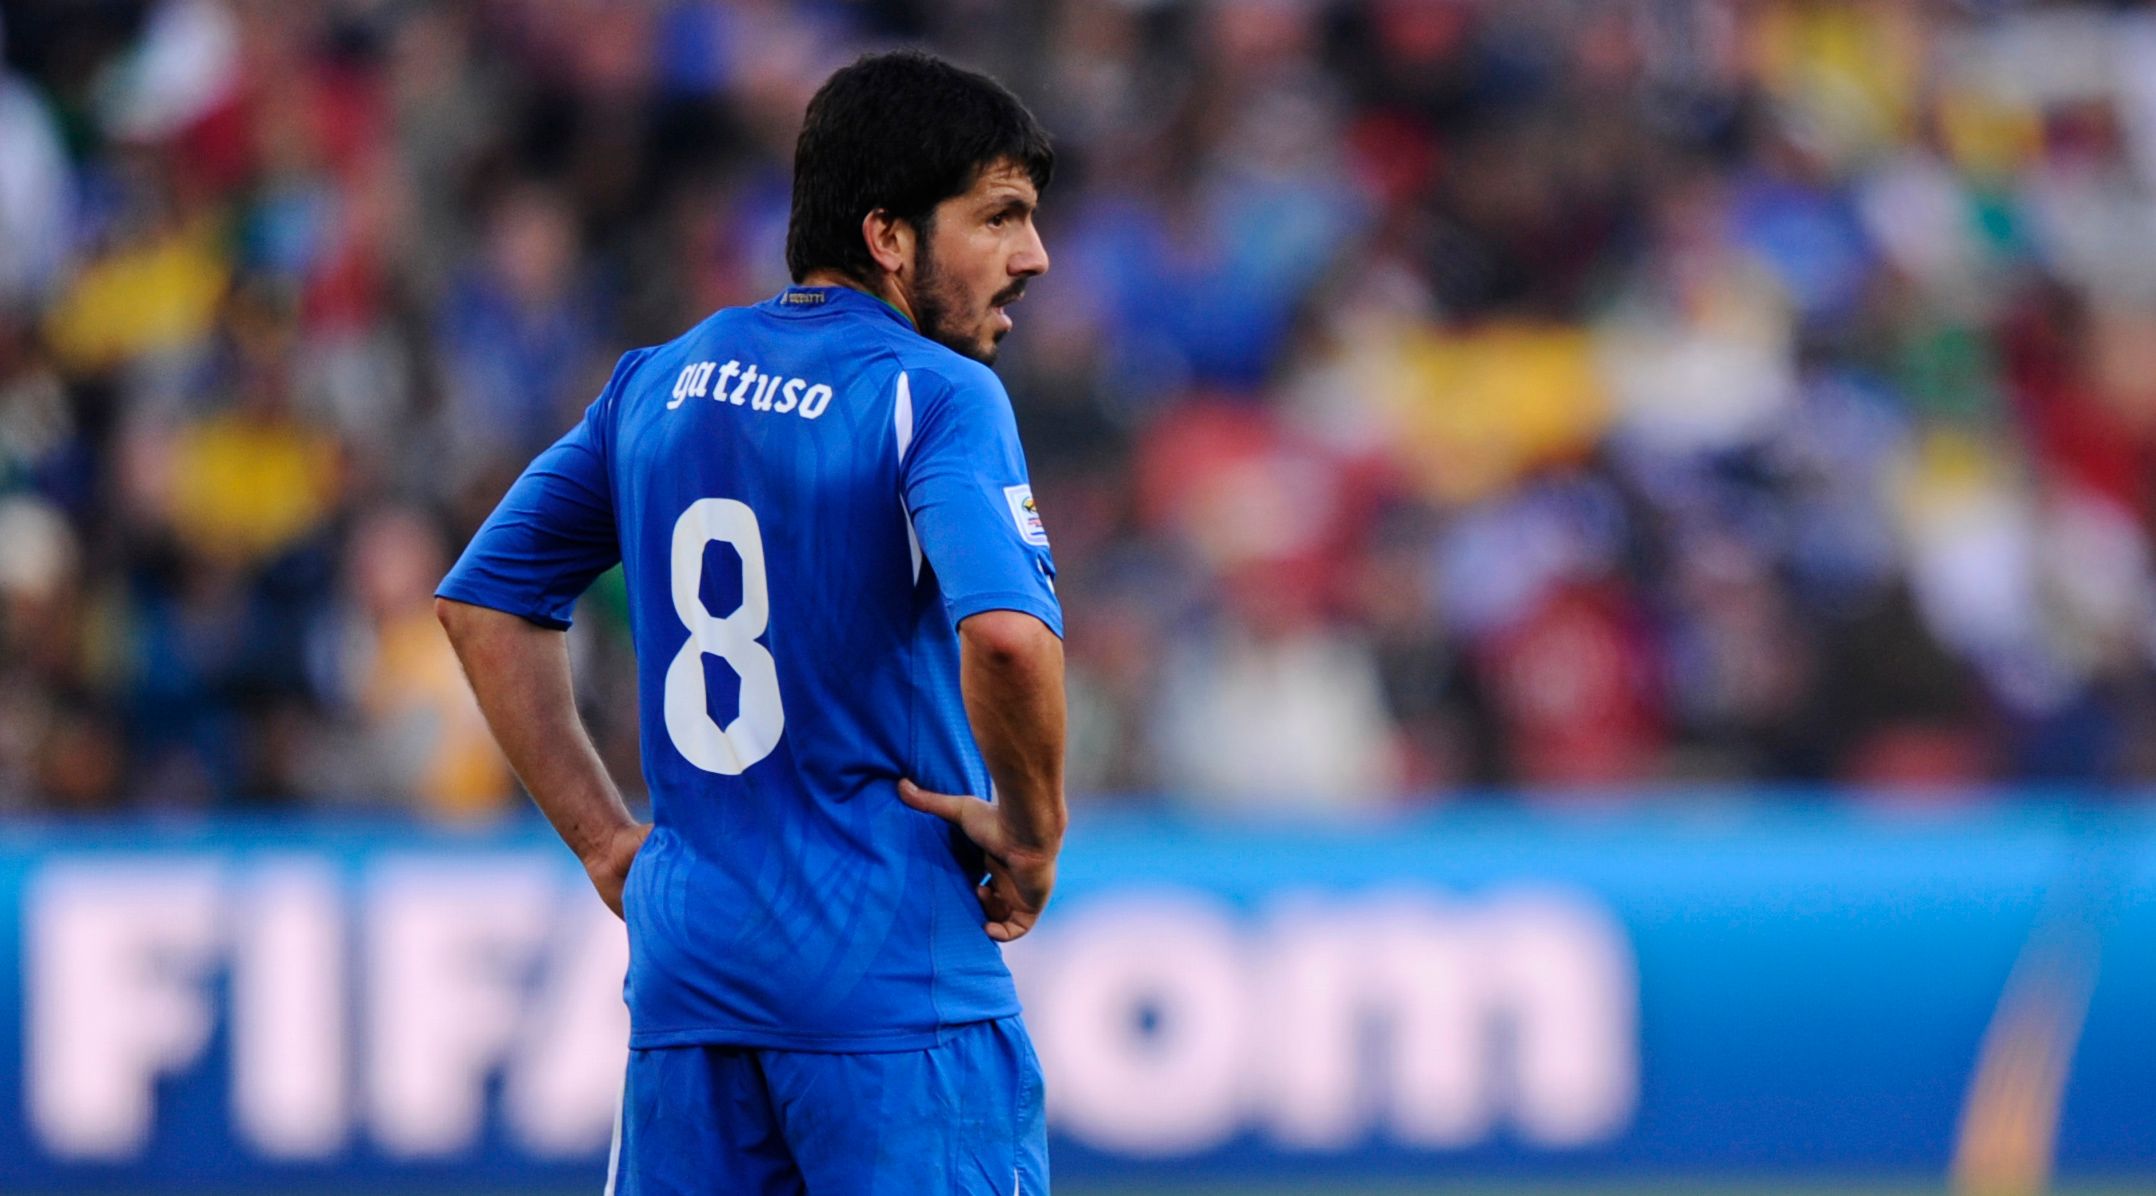 gattuso-world-cup-italy-south-africa-rangers-quiz